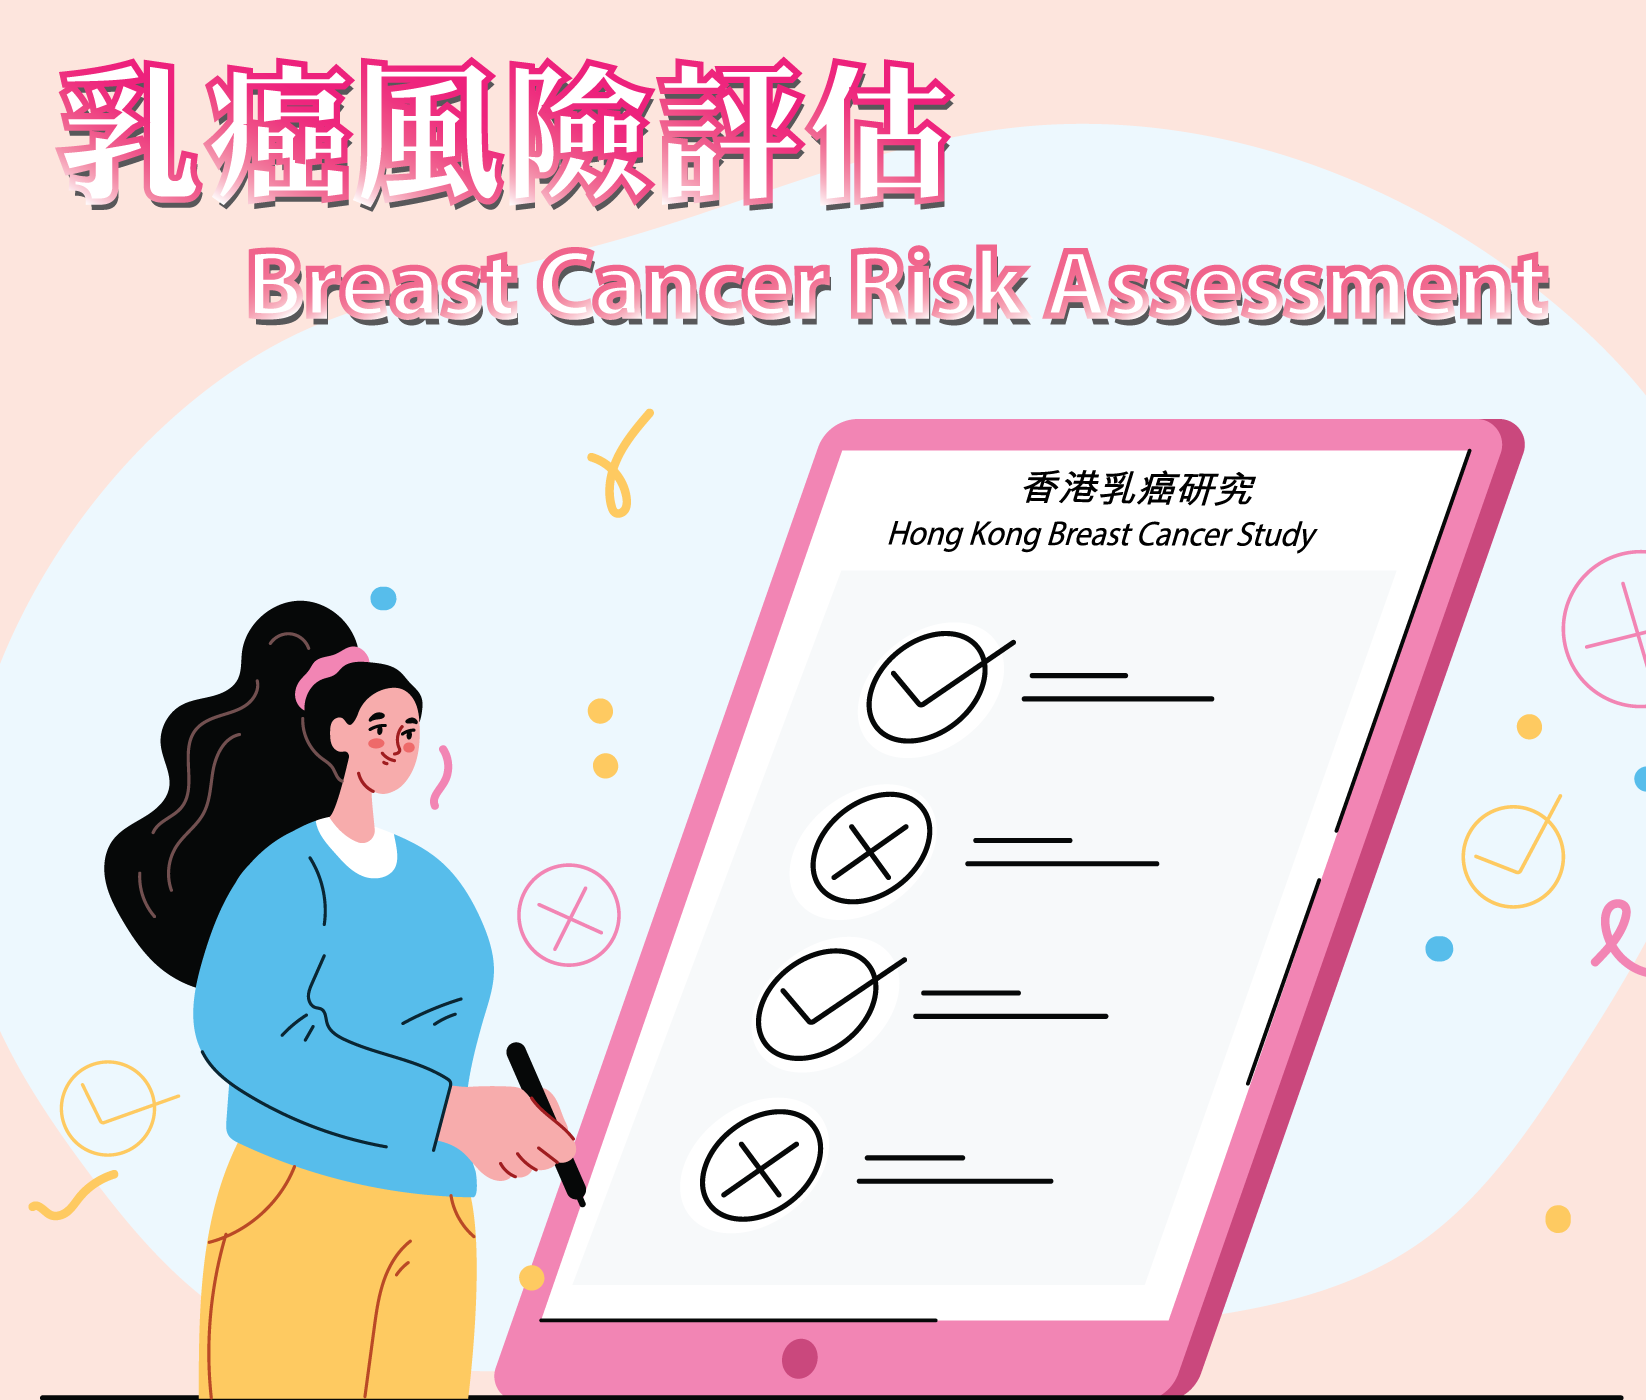 Self Photos / Files - Breast Cancer Risk Assessment_Gallery